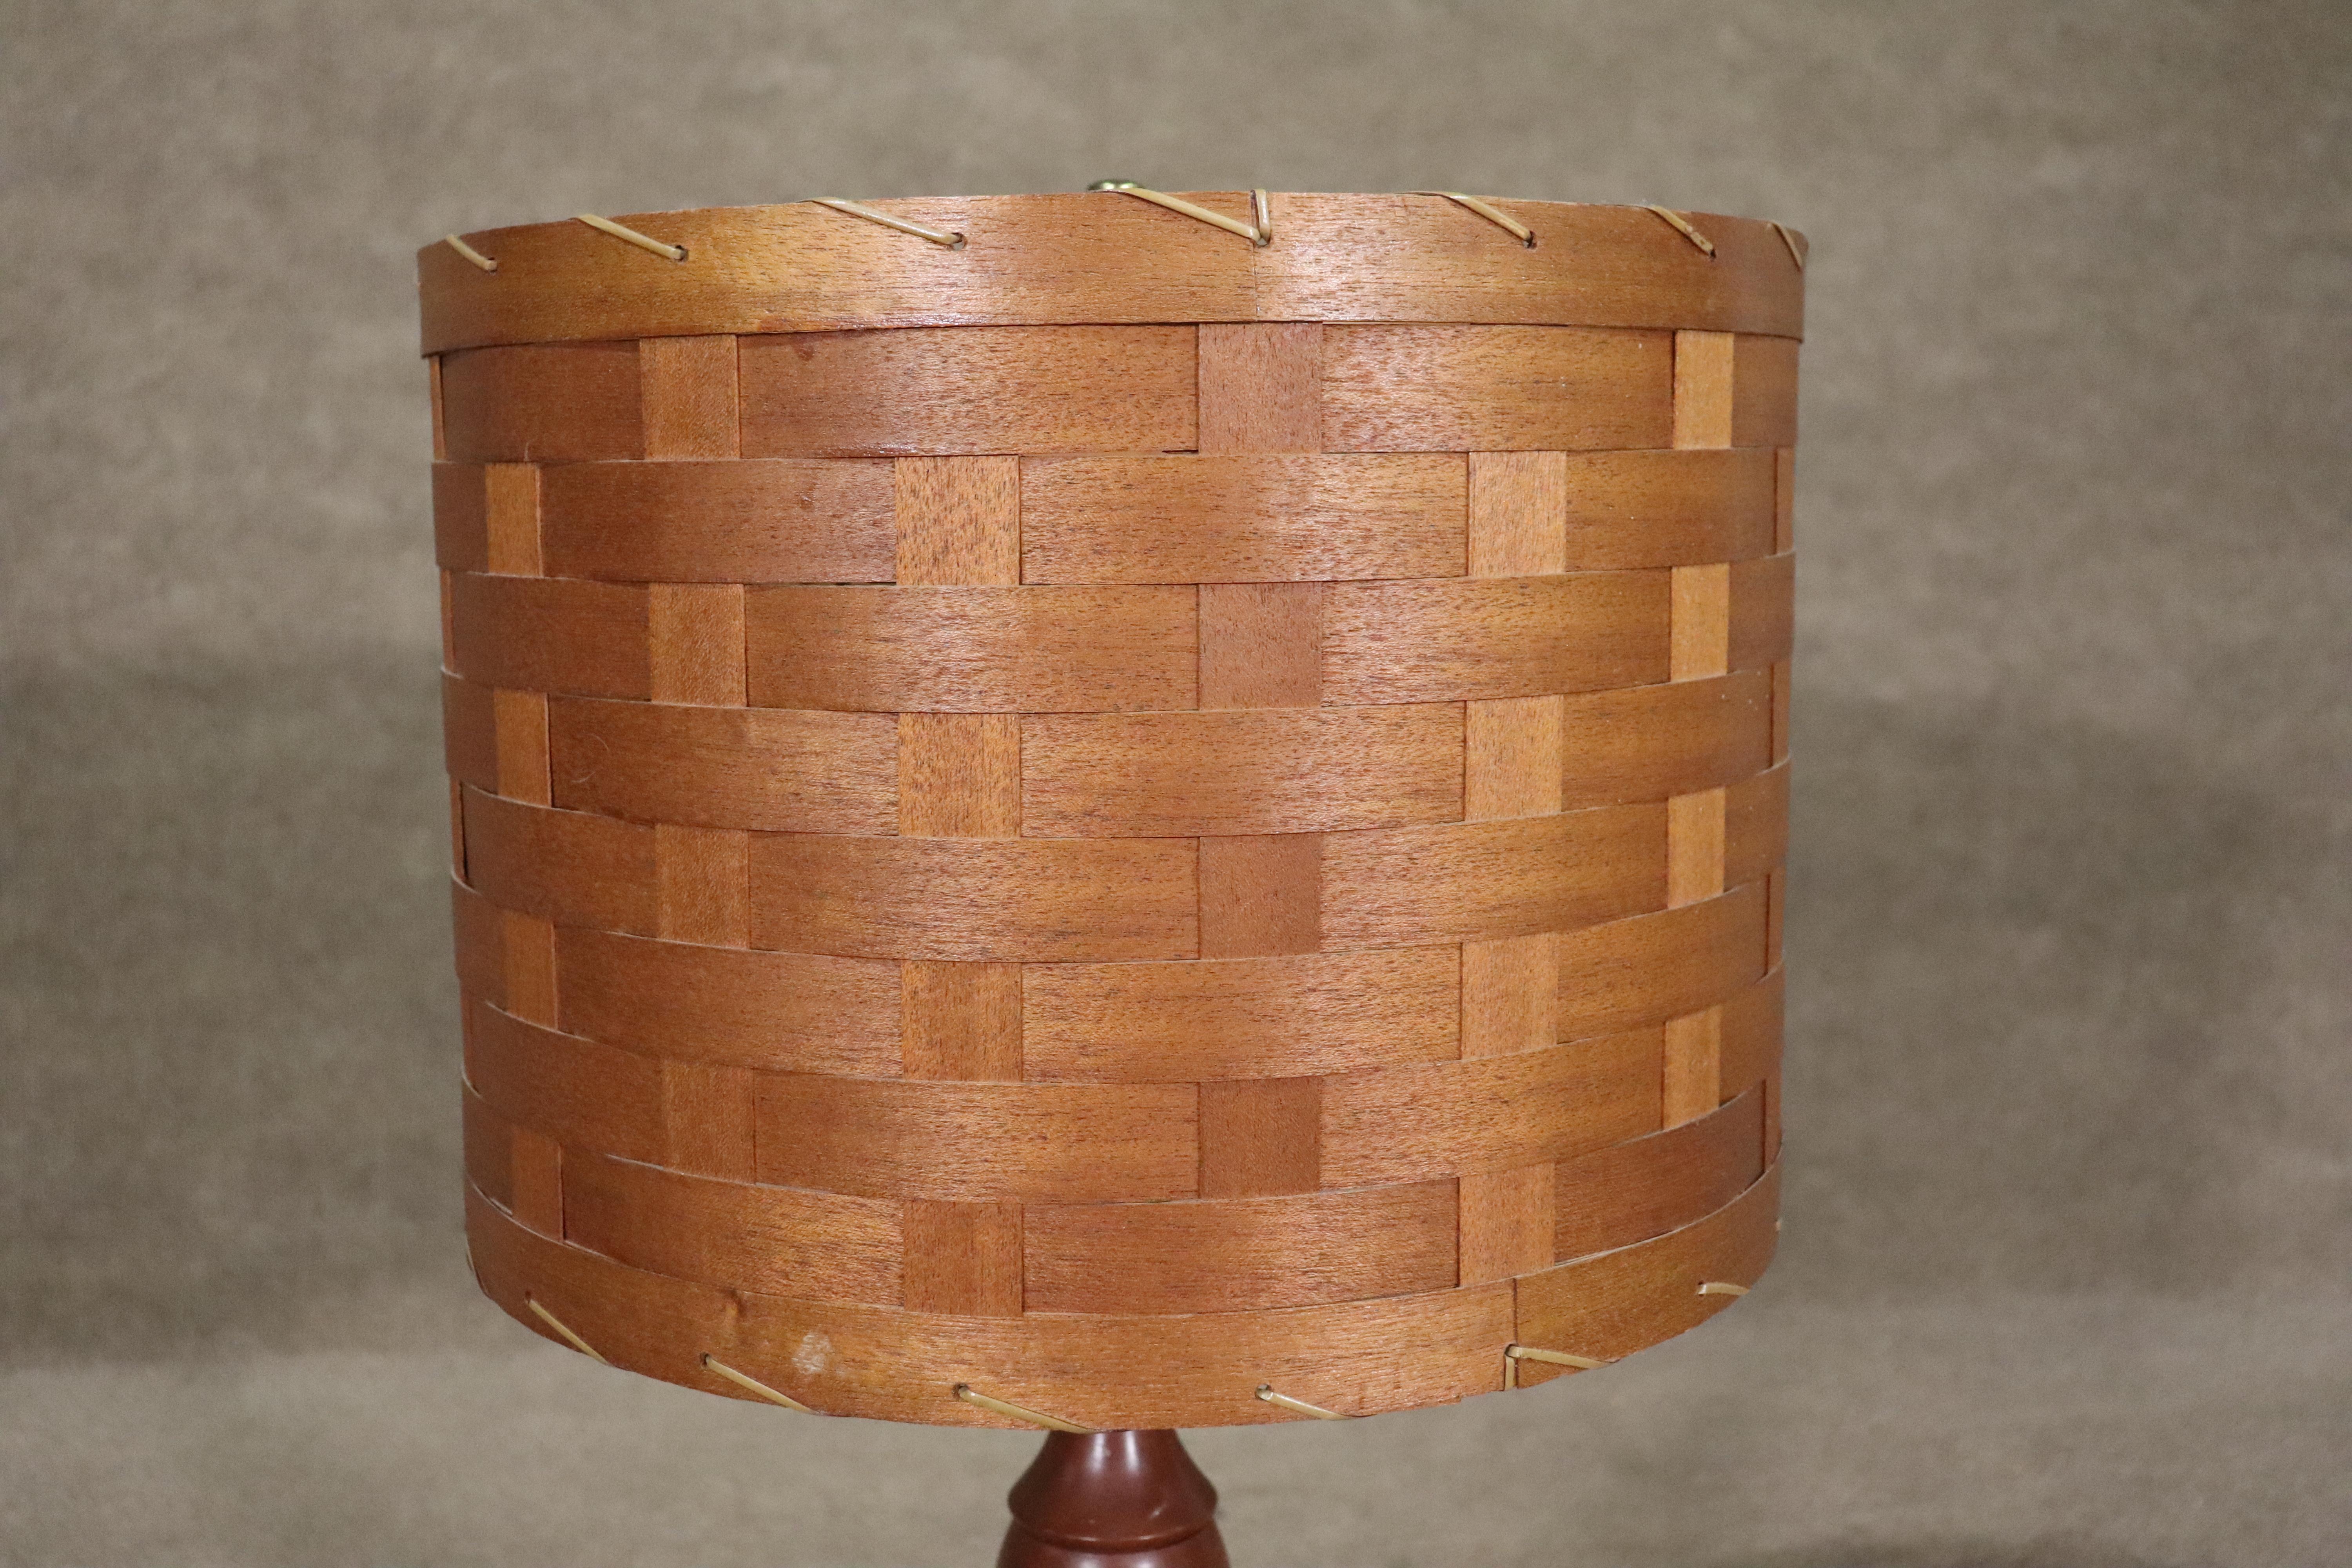 This single vintage table lamp is made in Tennessee by the Wood Whittler Company. Great mid-century style with original woven wood shade. 
Please confirm location NY or NJ